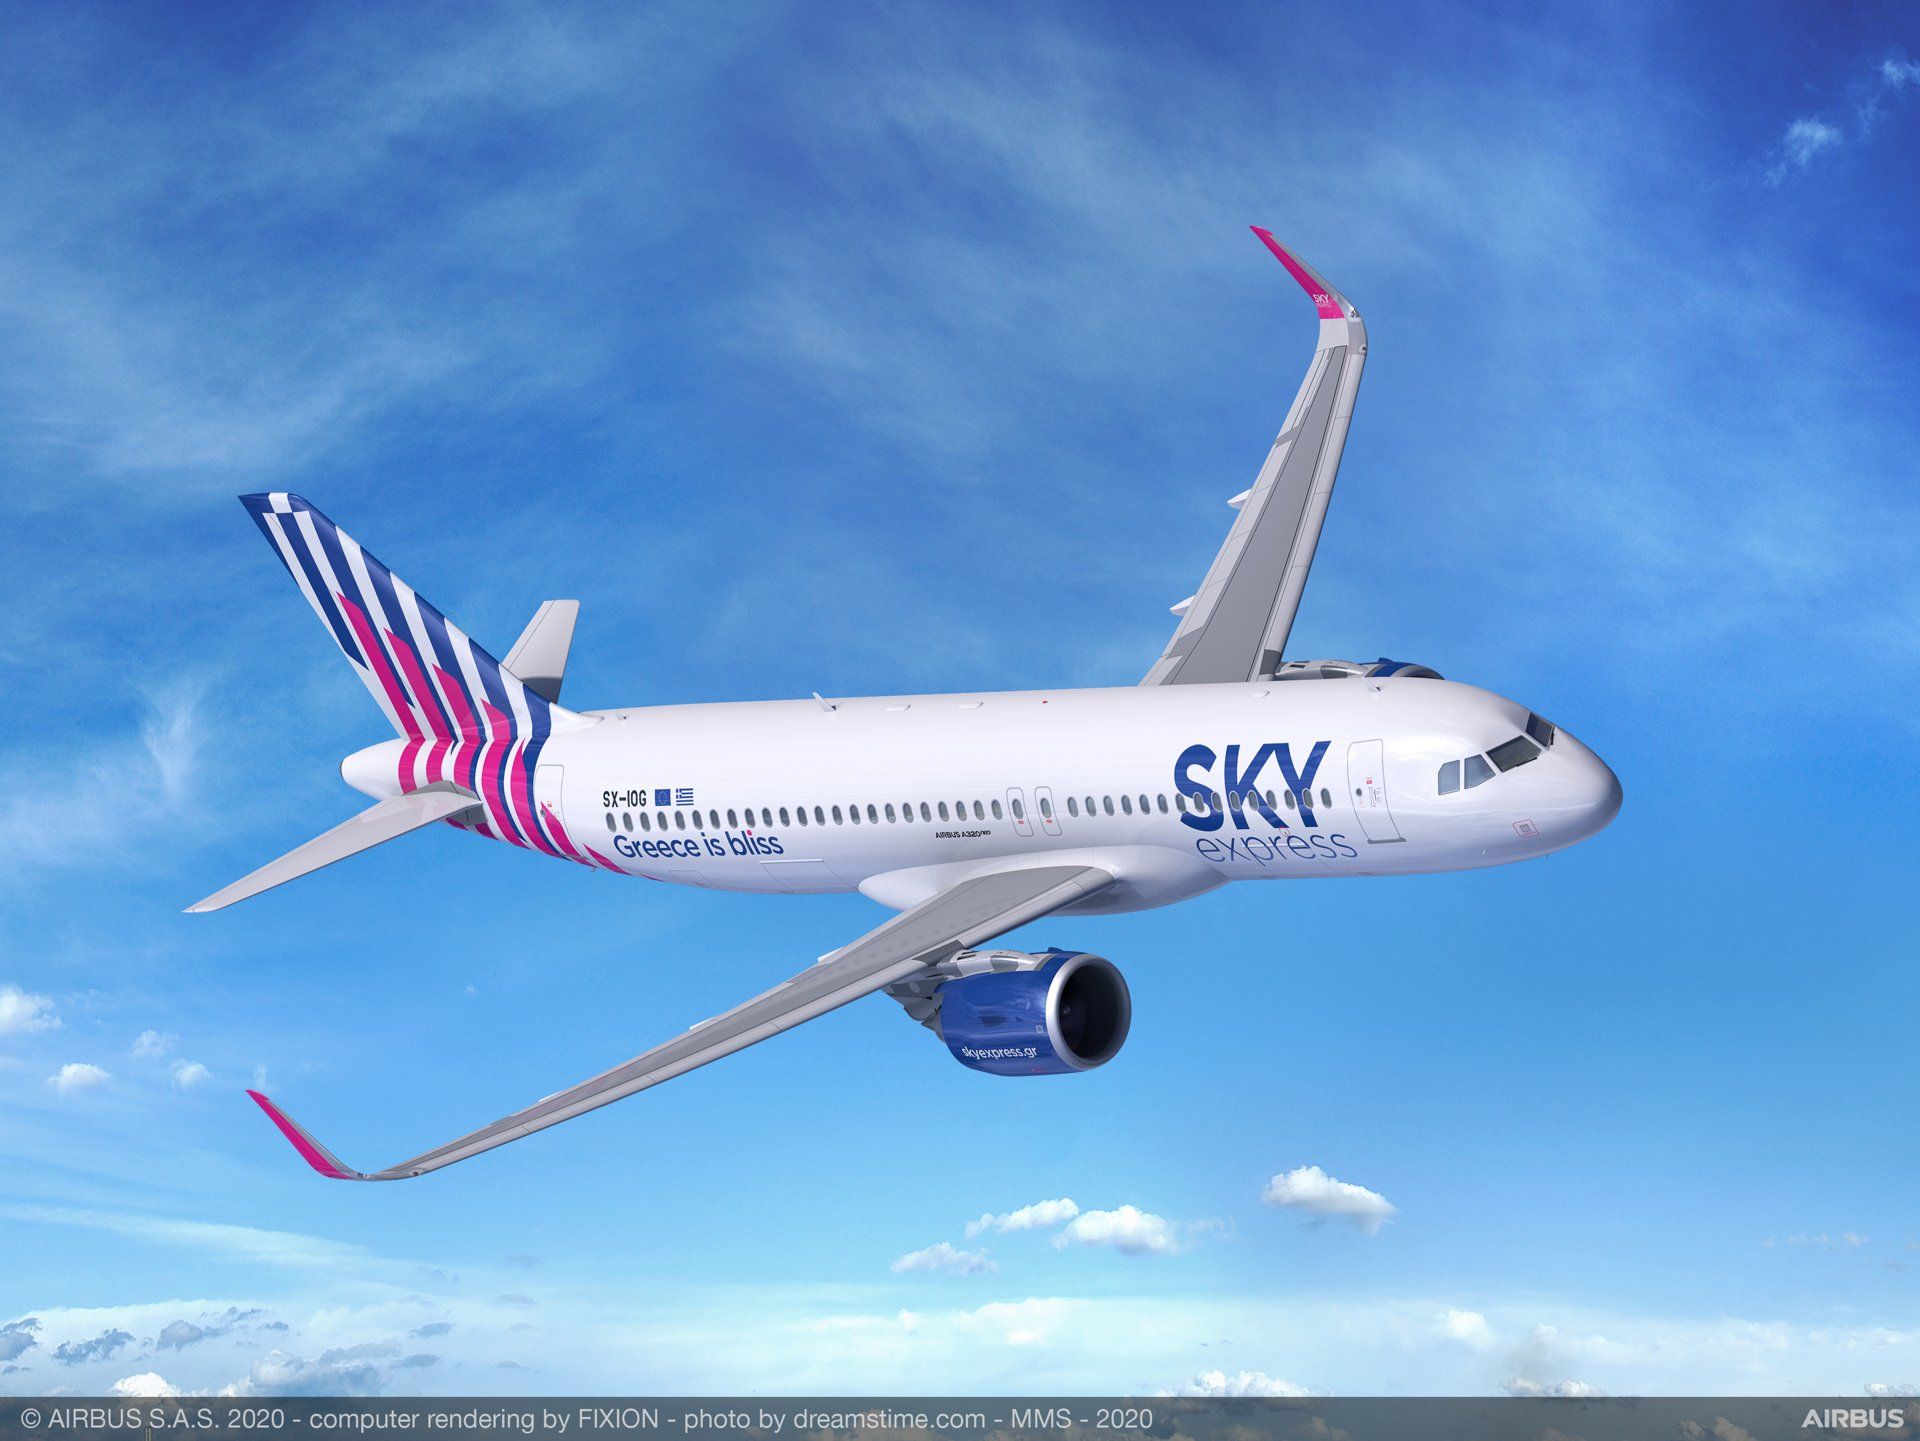 SKY express flights to Rhodes commenced with the brandnew Airbus A320neo